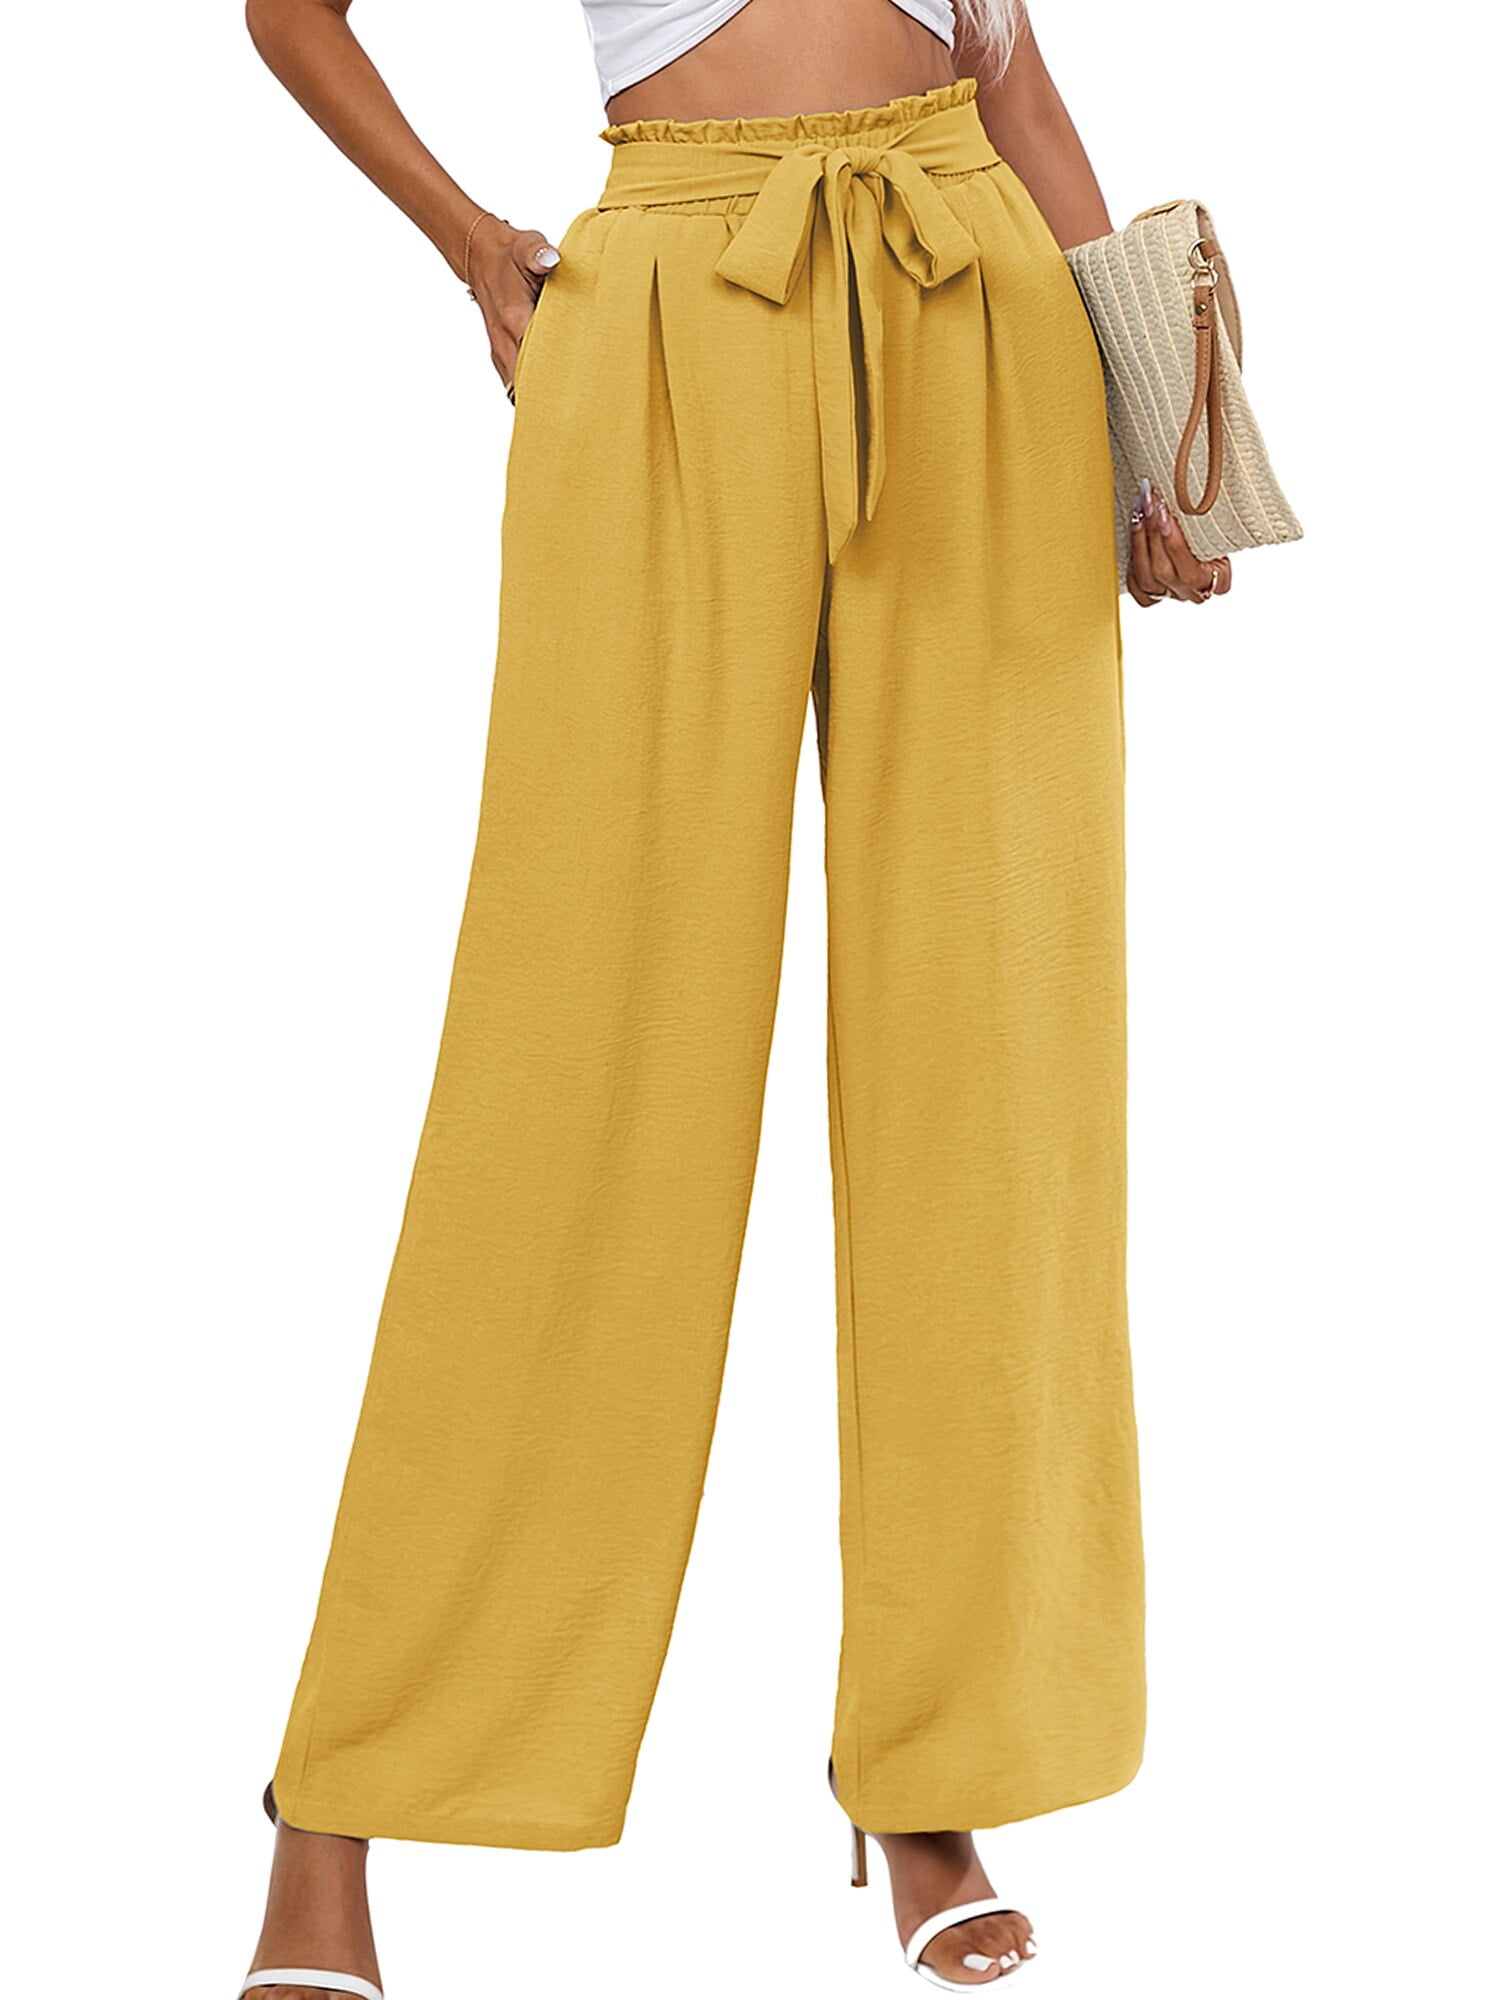  Ayturbo Women's Casual Wide Leg Pants with Pockets